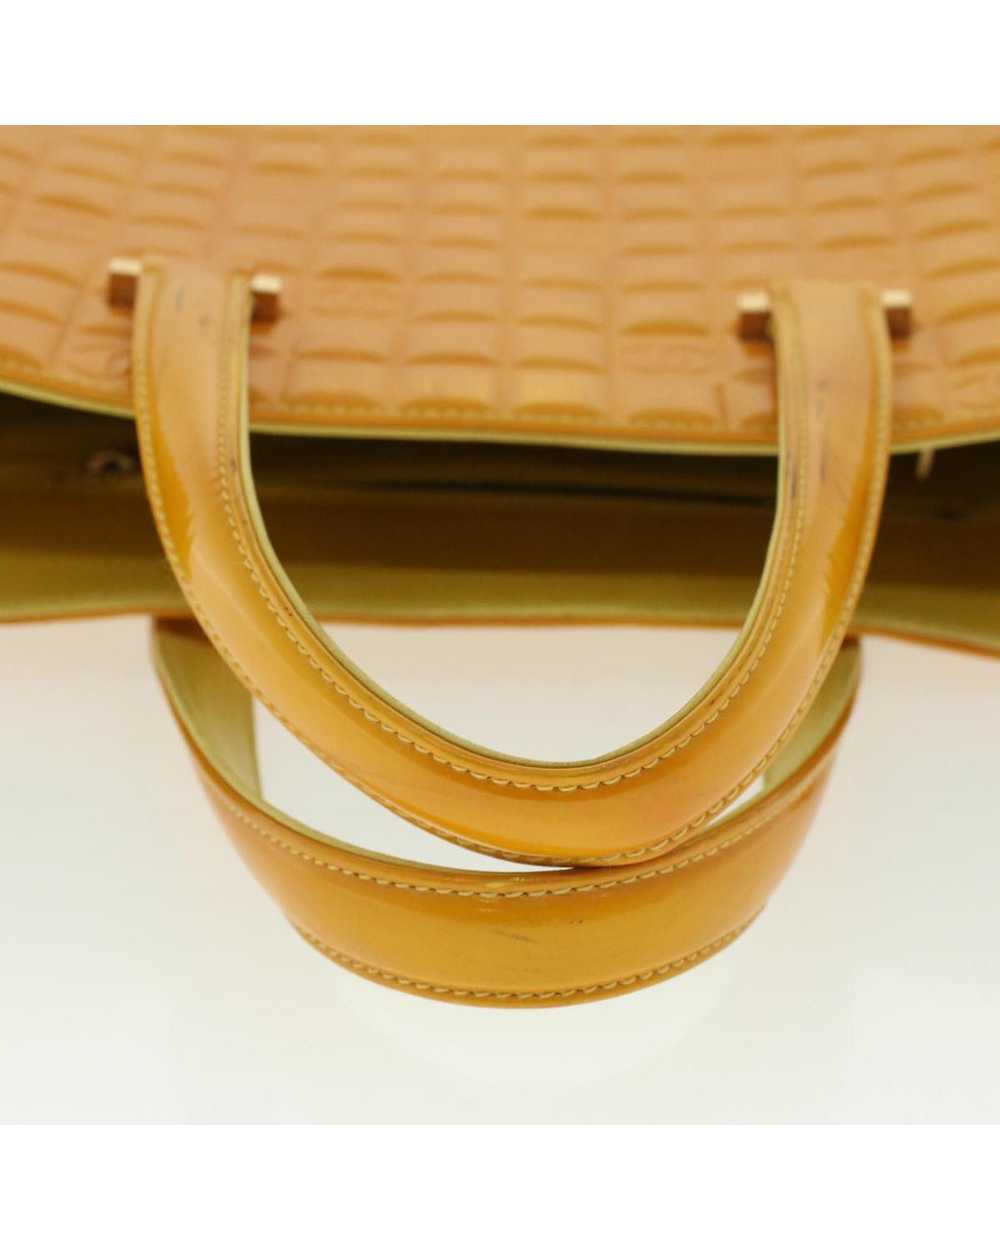 Chanel Yellow Patent Leather Hand Bag - image 7